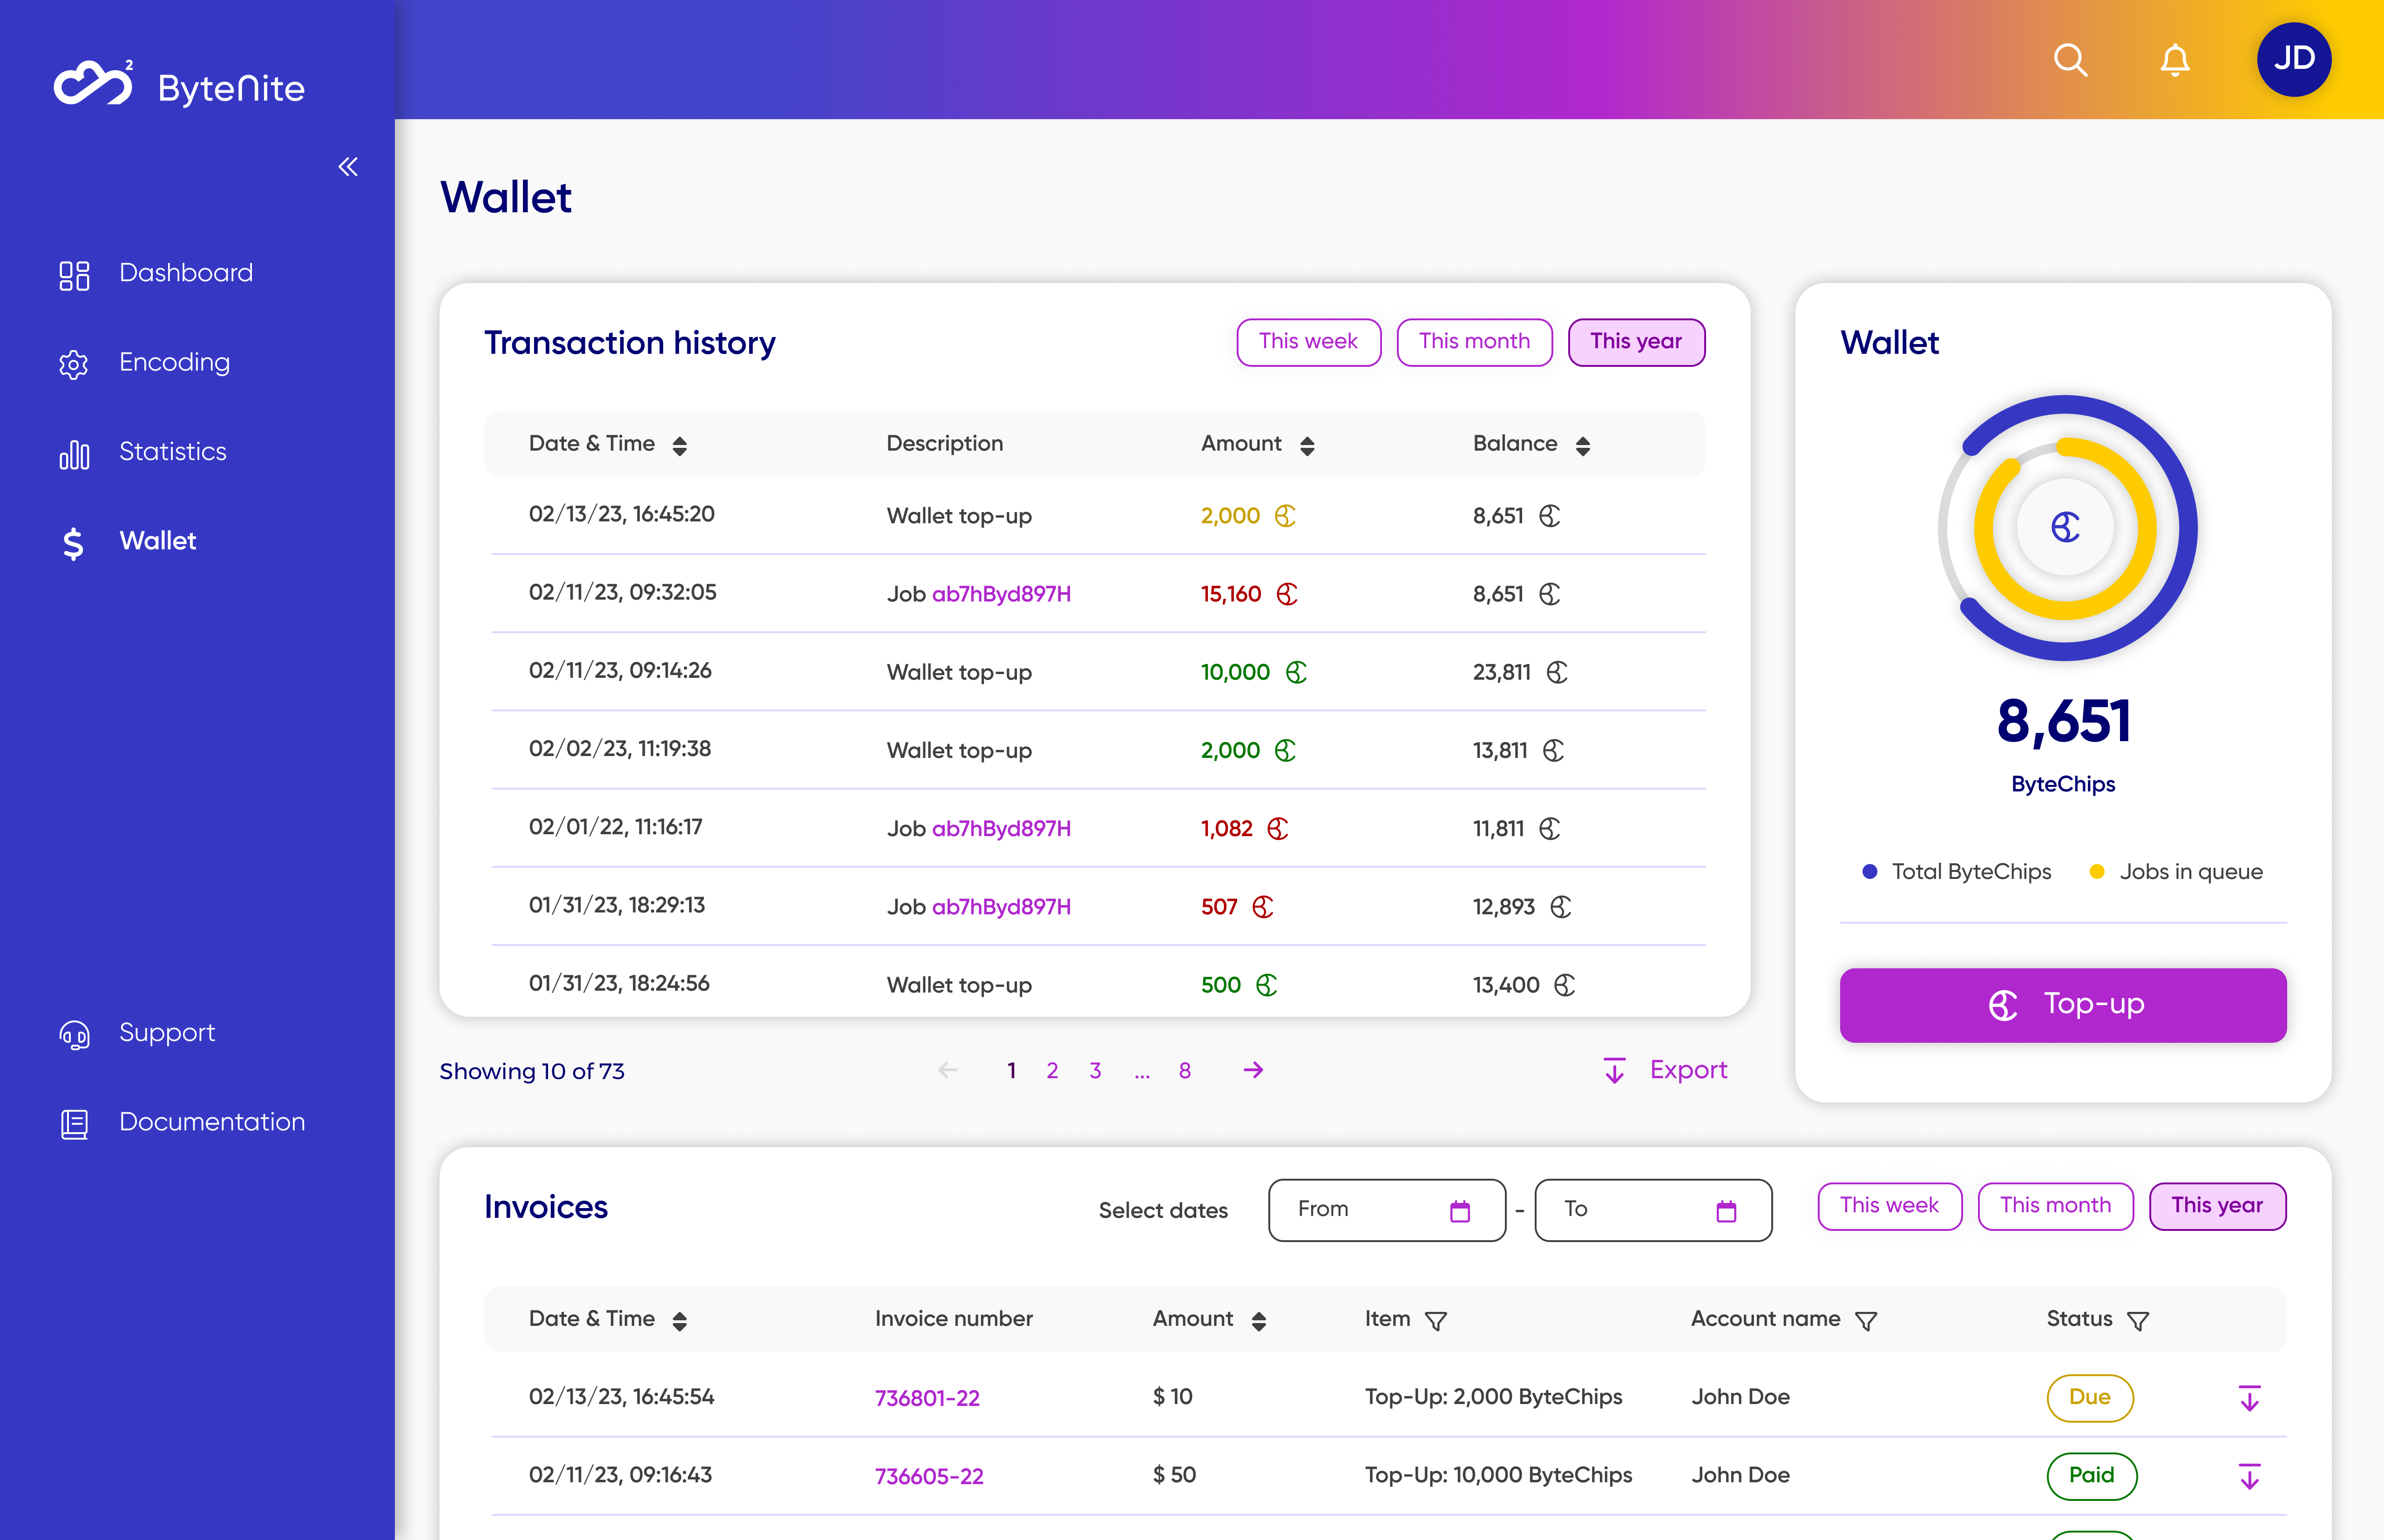 Wallet Page - Top up your account with ByteNite's credits called "ByteChips", and view your account history.